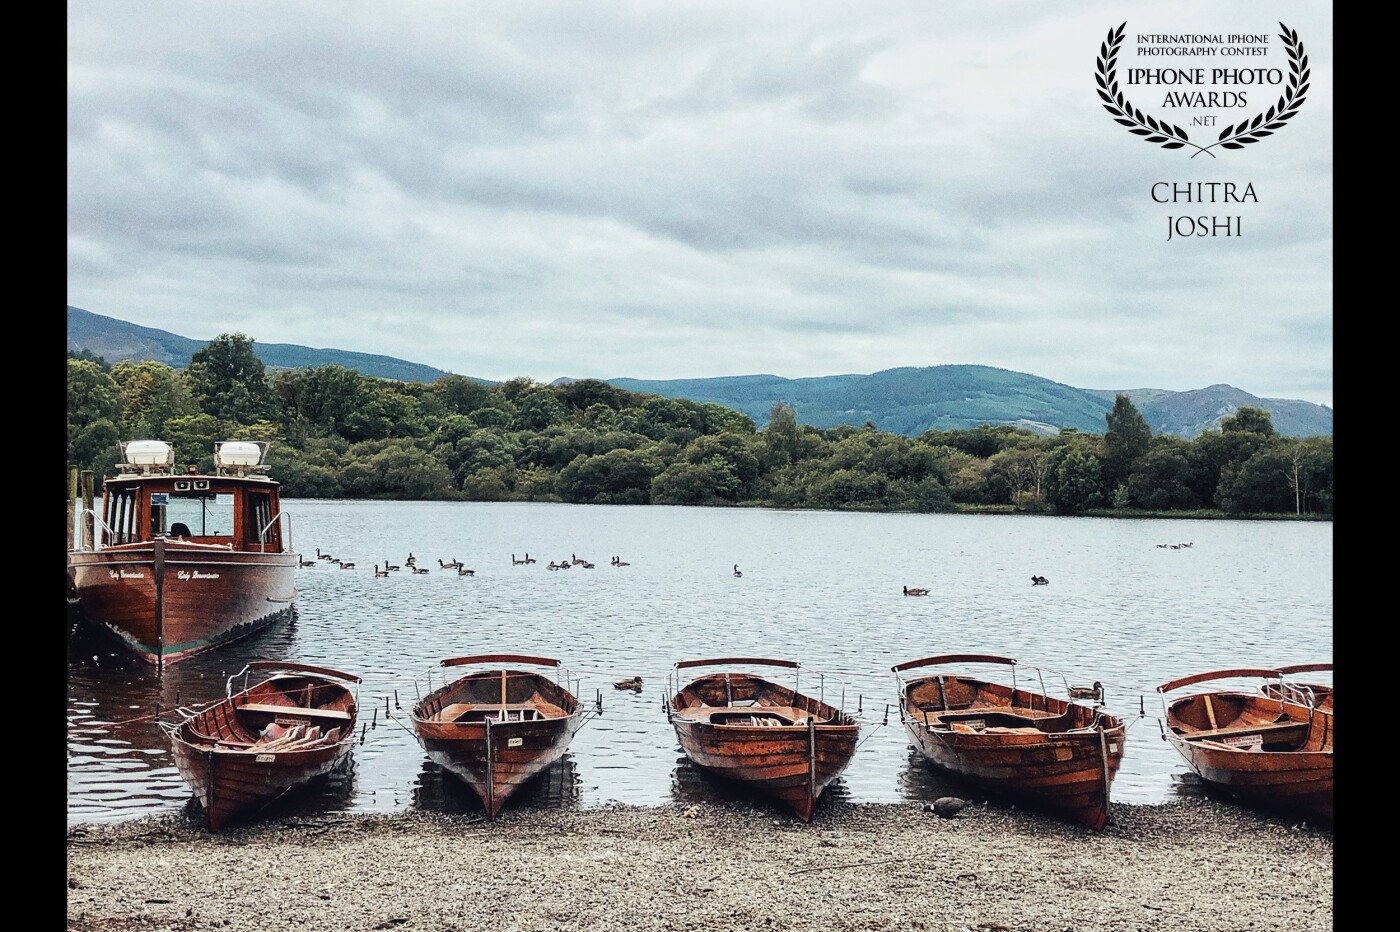 The boats are the characteristic tourist features of Lake District, United Kingdom which has 16 lakes. This view was captured at one of the beautiful lakes named "Derwent Water".